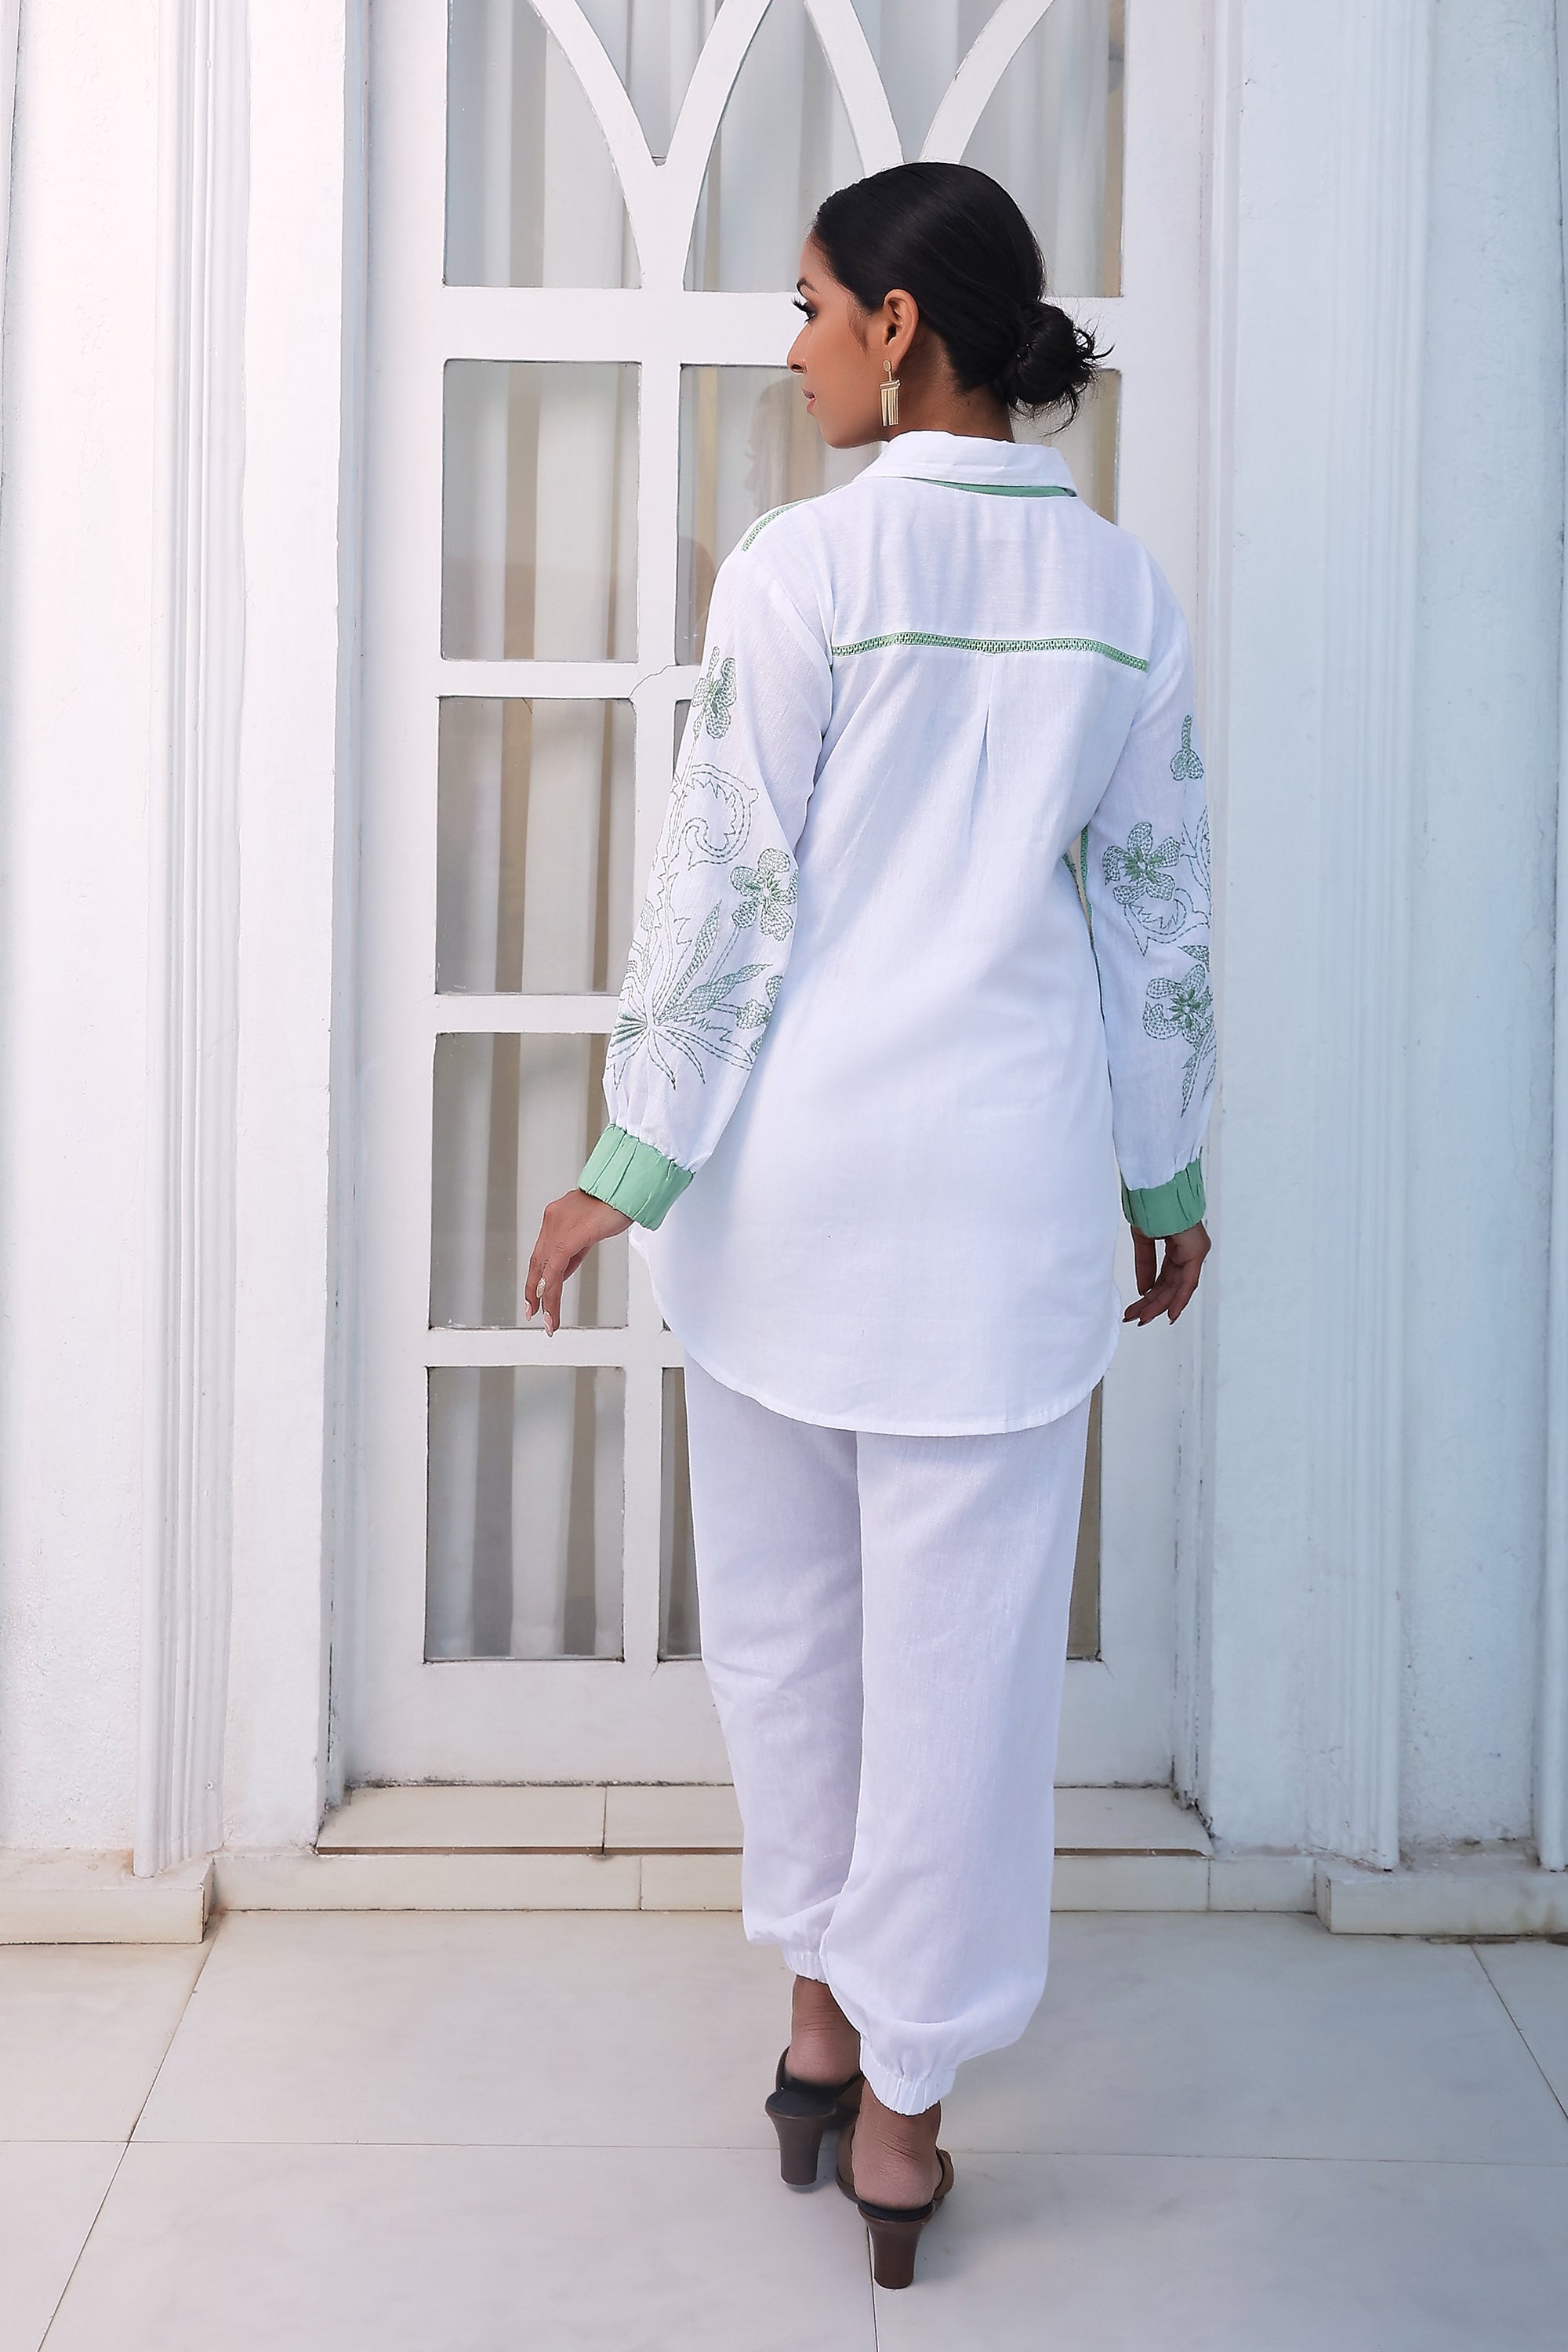 White Shirt Style Tunic With Embroidery - Kaftanize